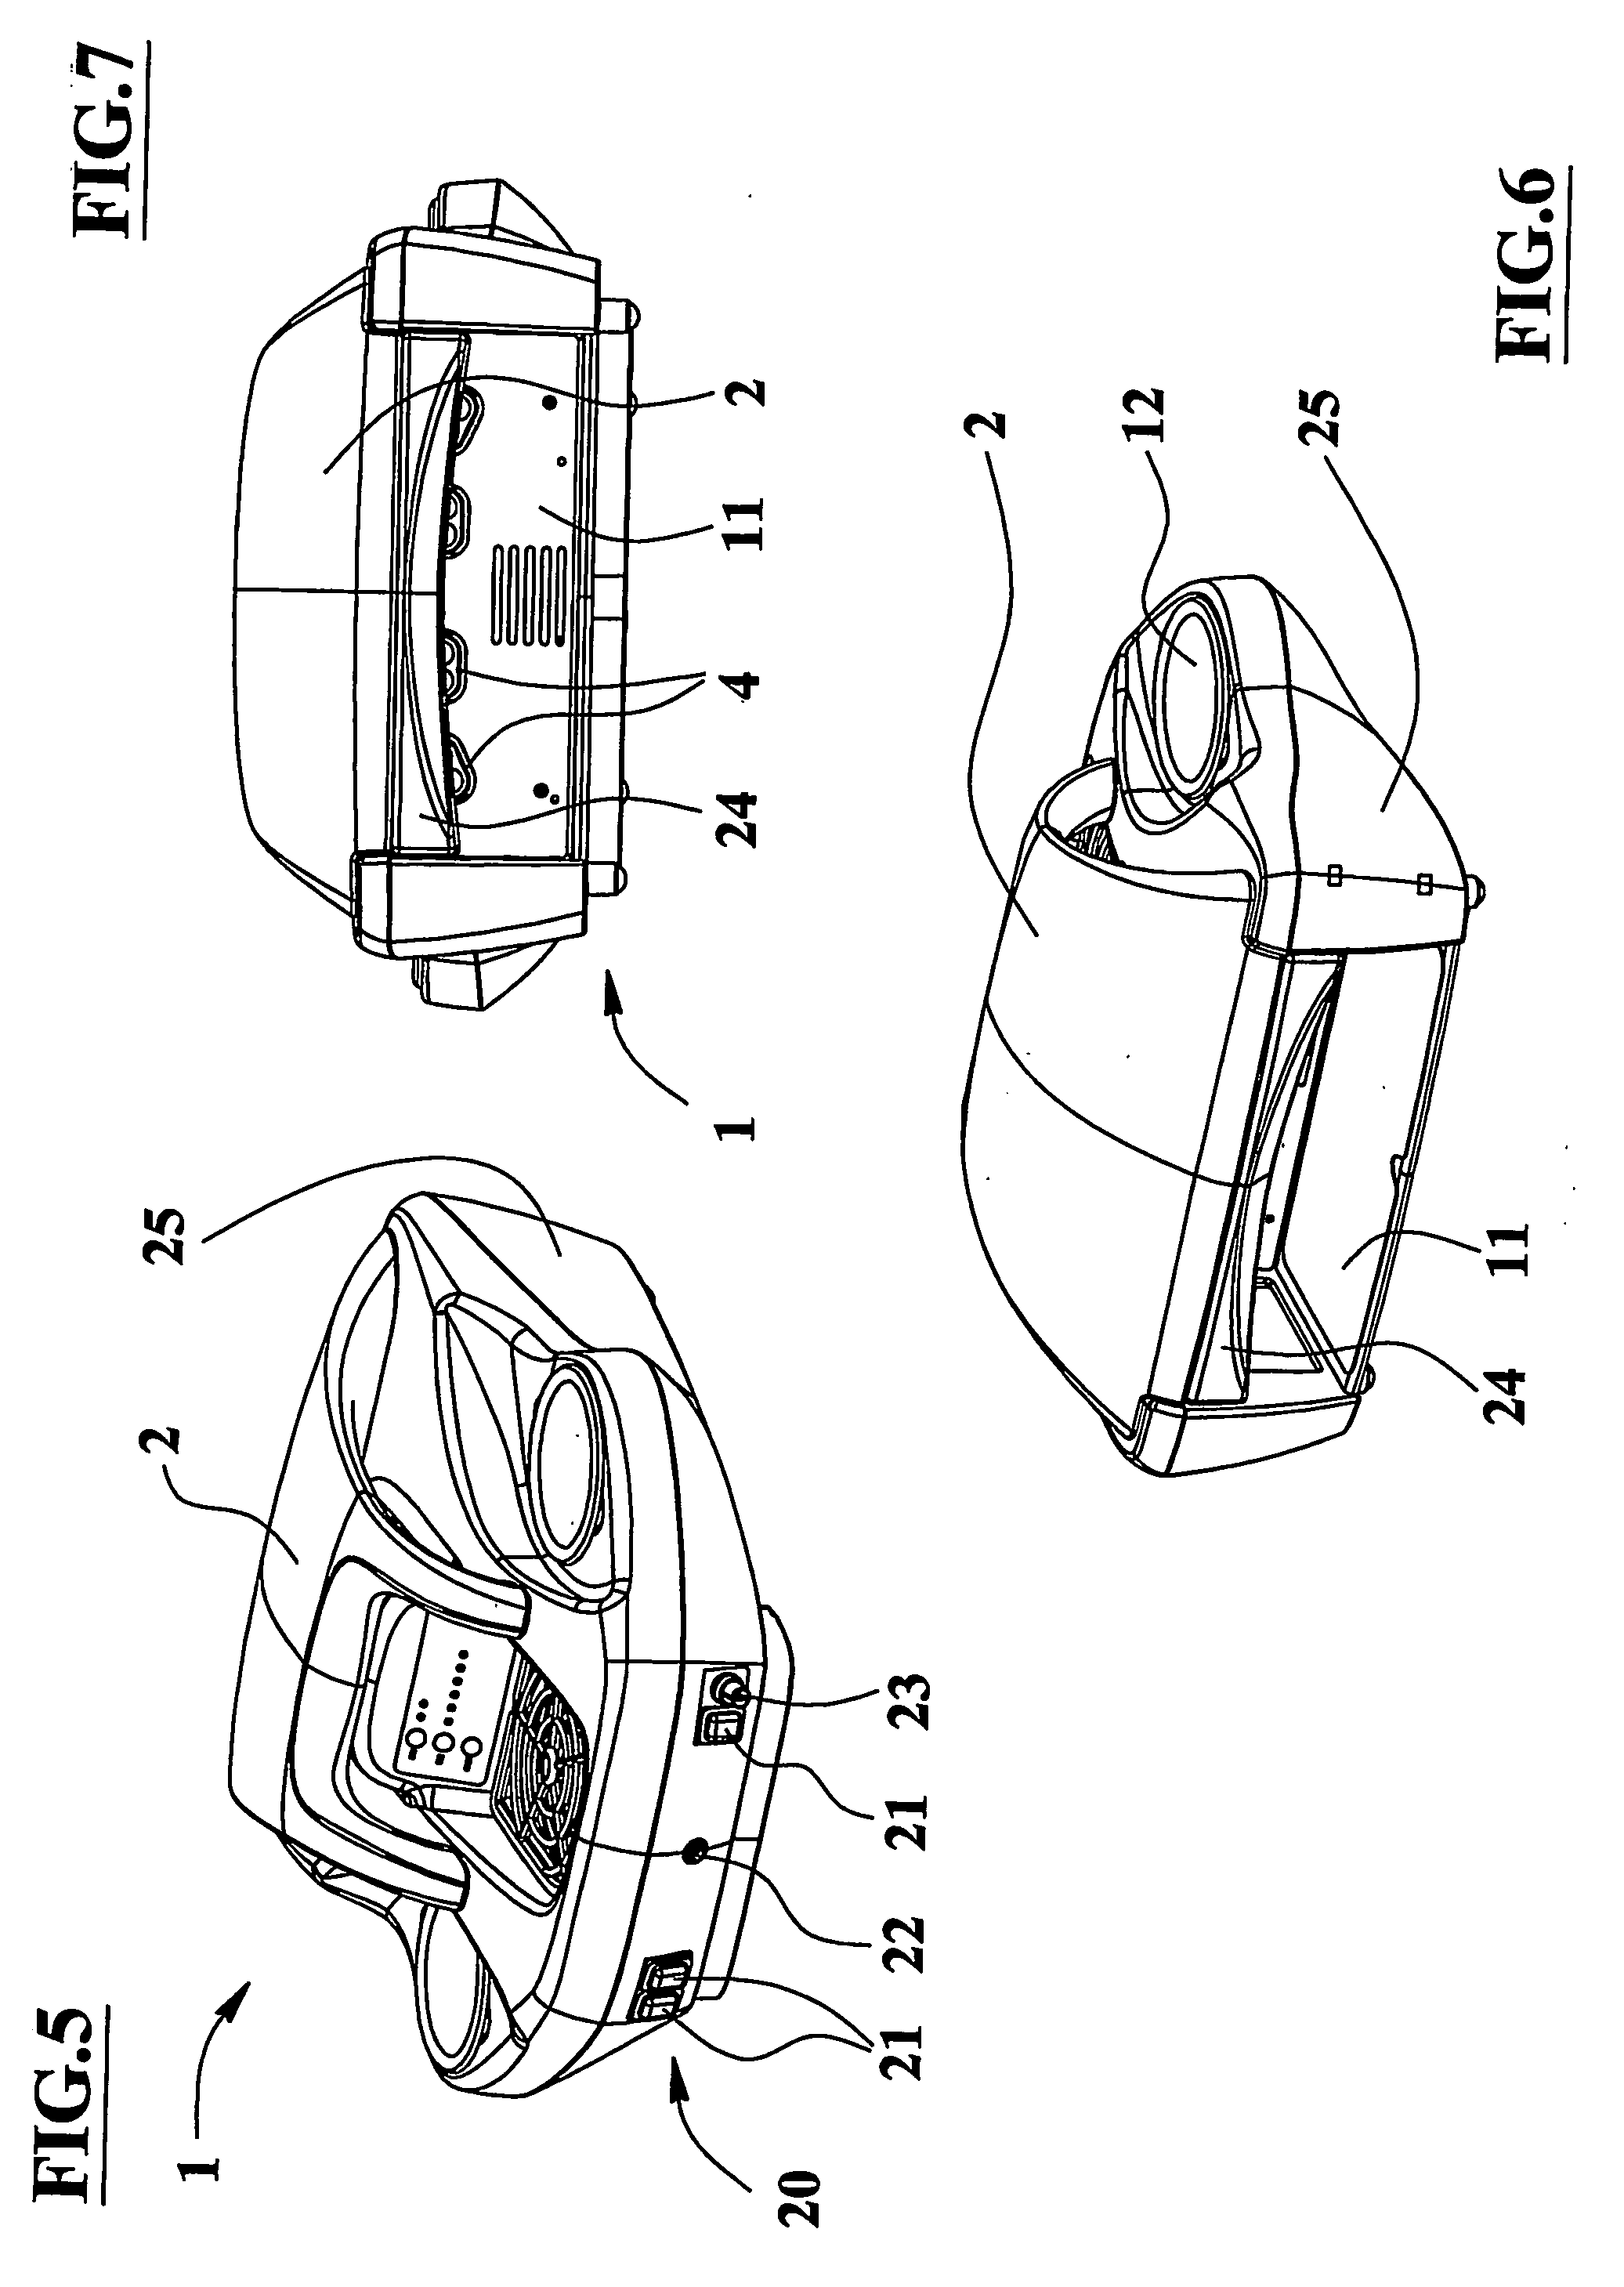 Device for beauty treatment of limbs